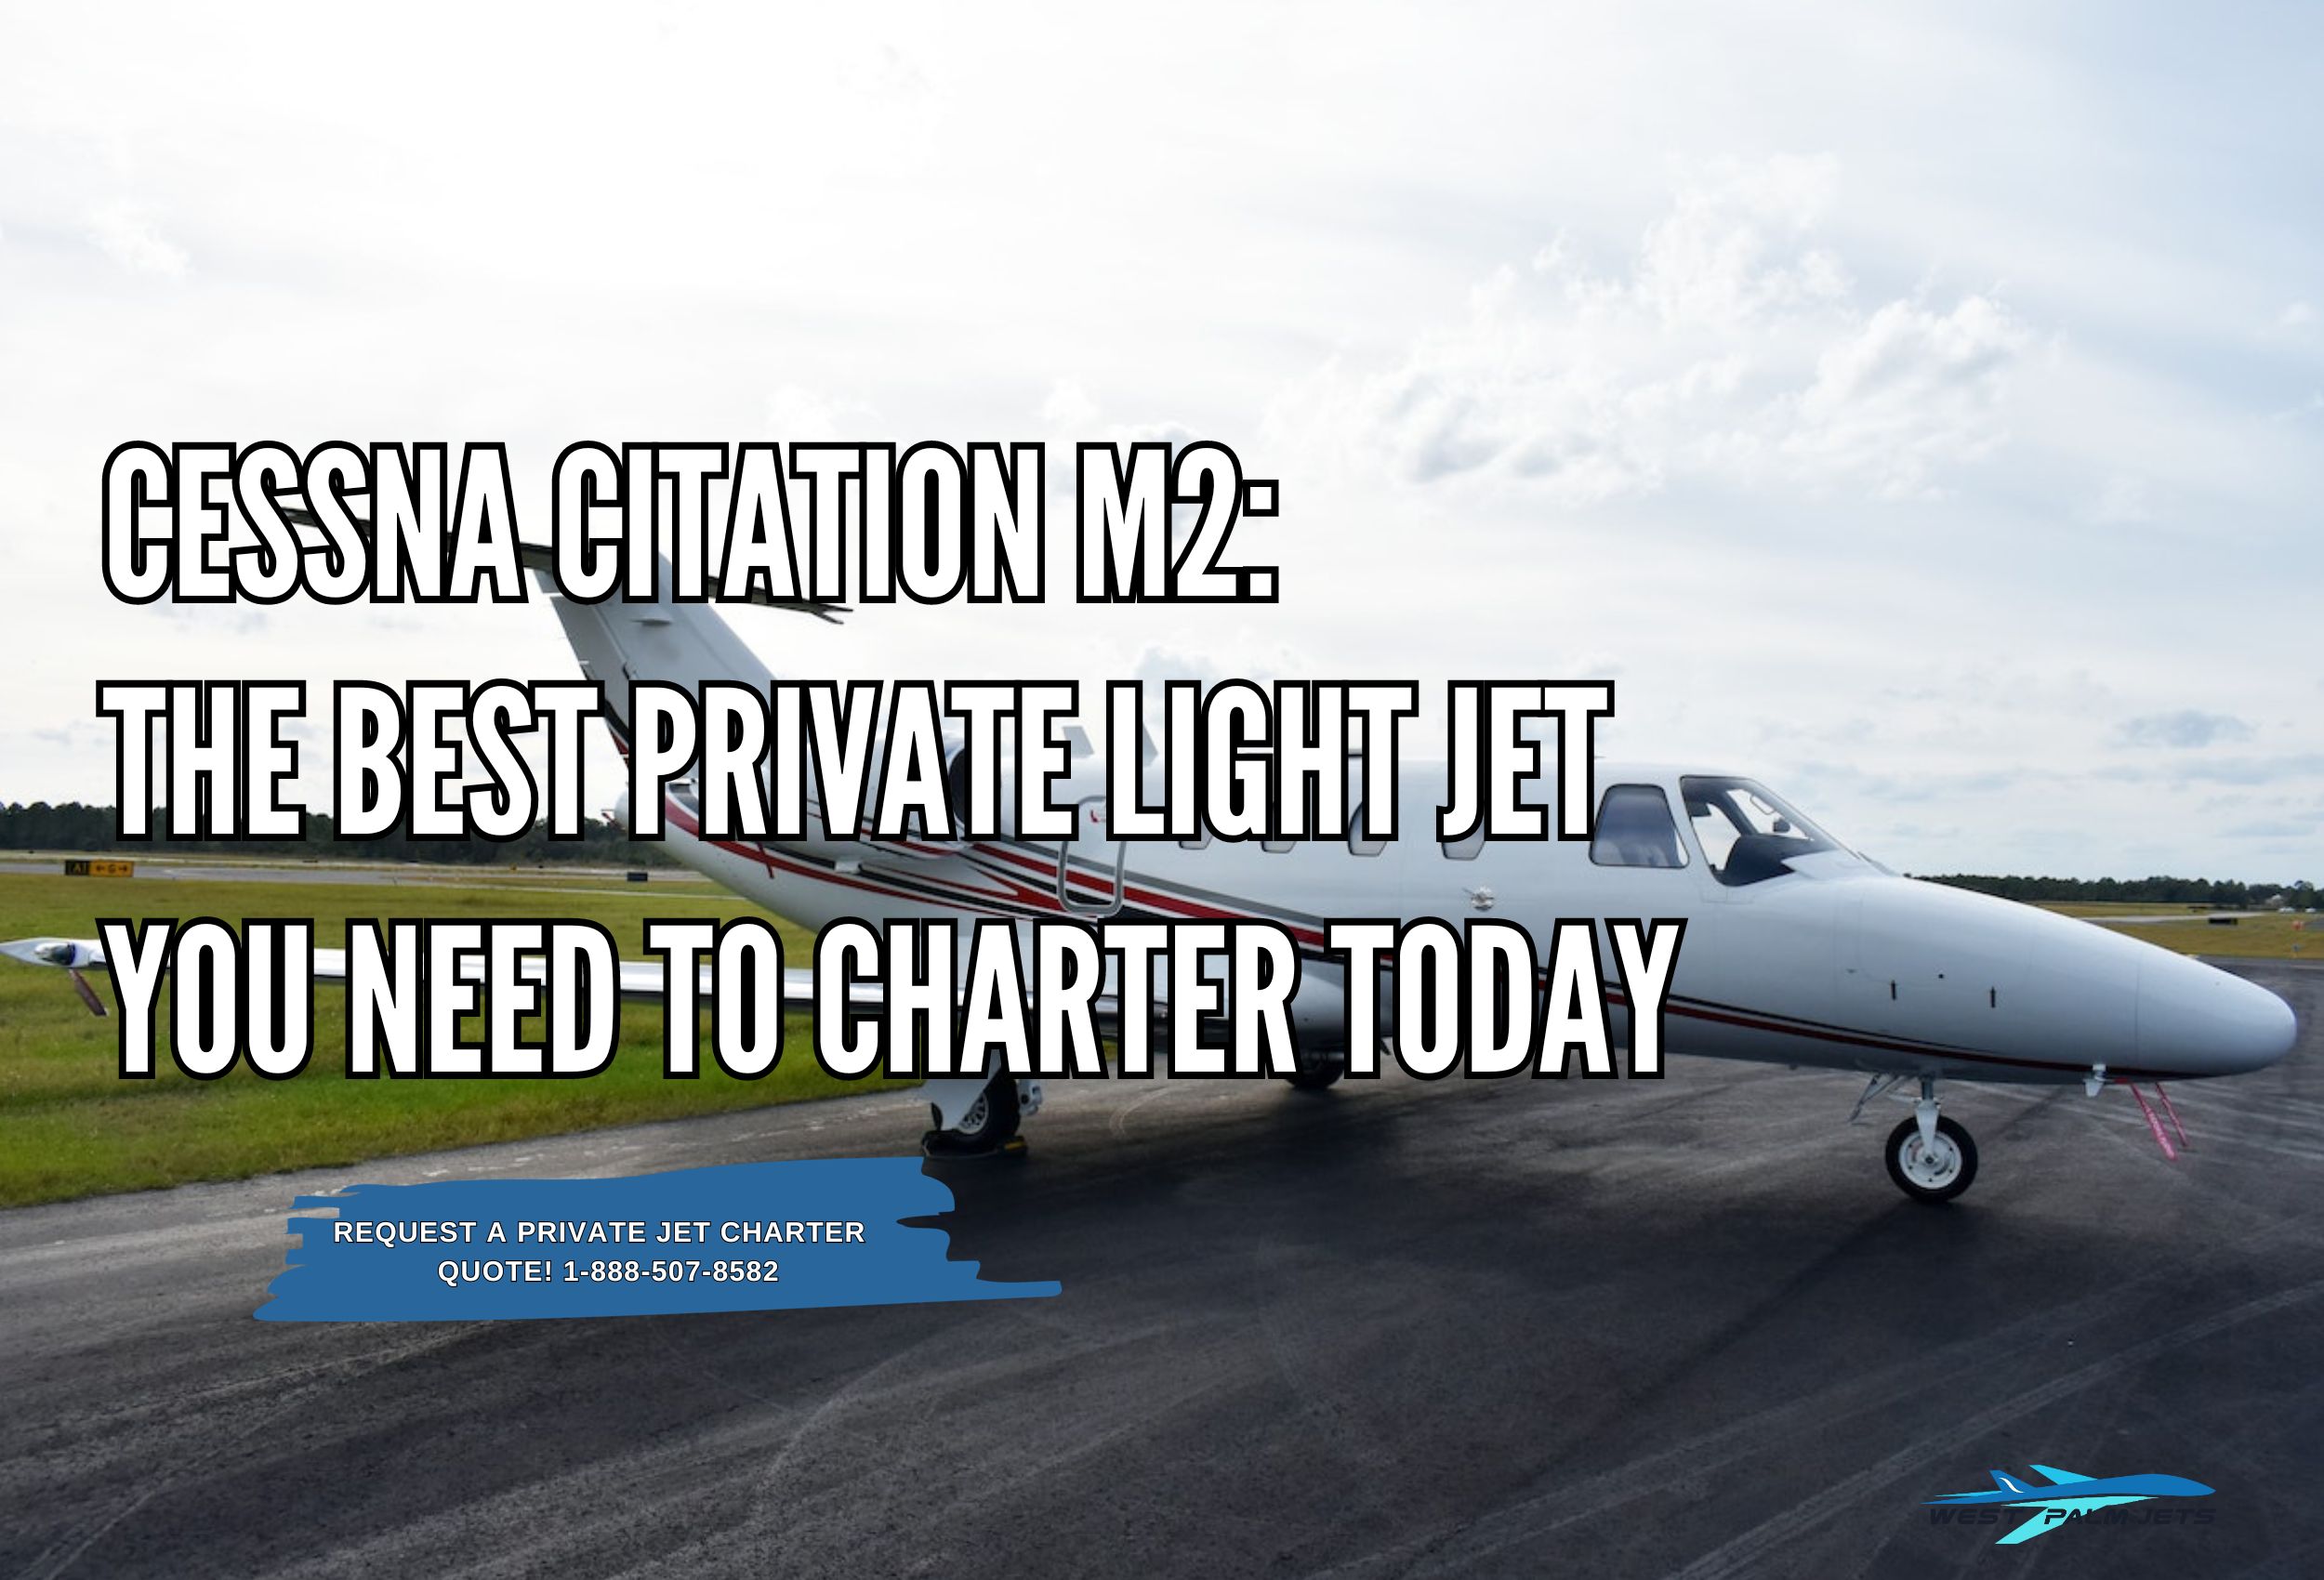 Cessna Citation M2 The Best Private Light Jet You Need to Charter Today